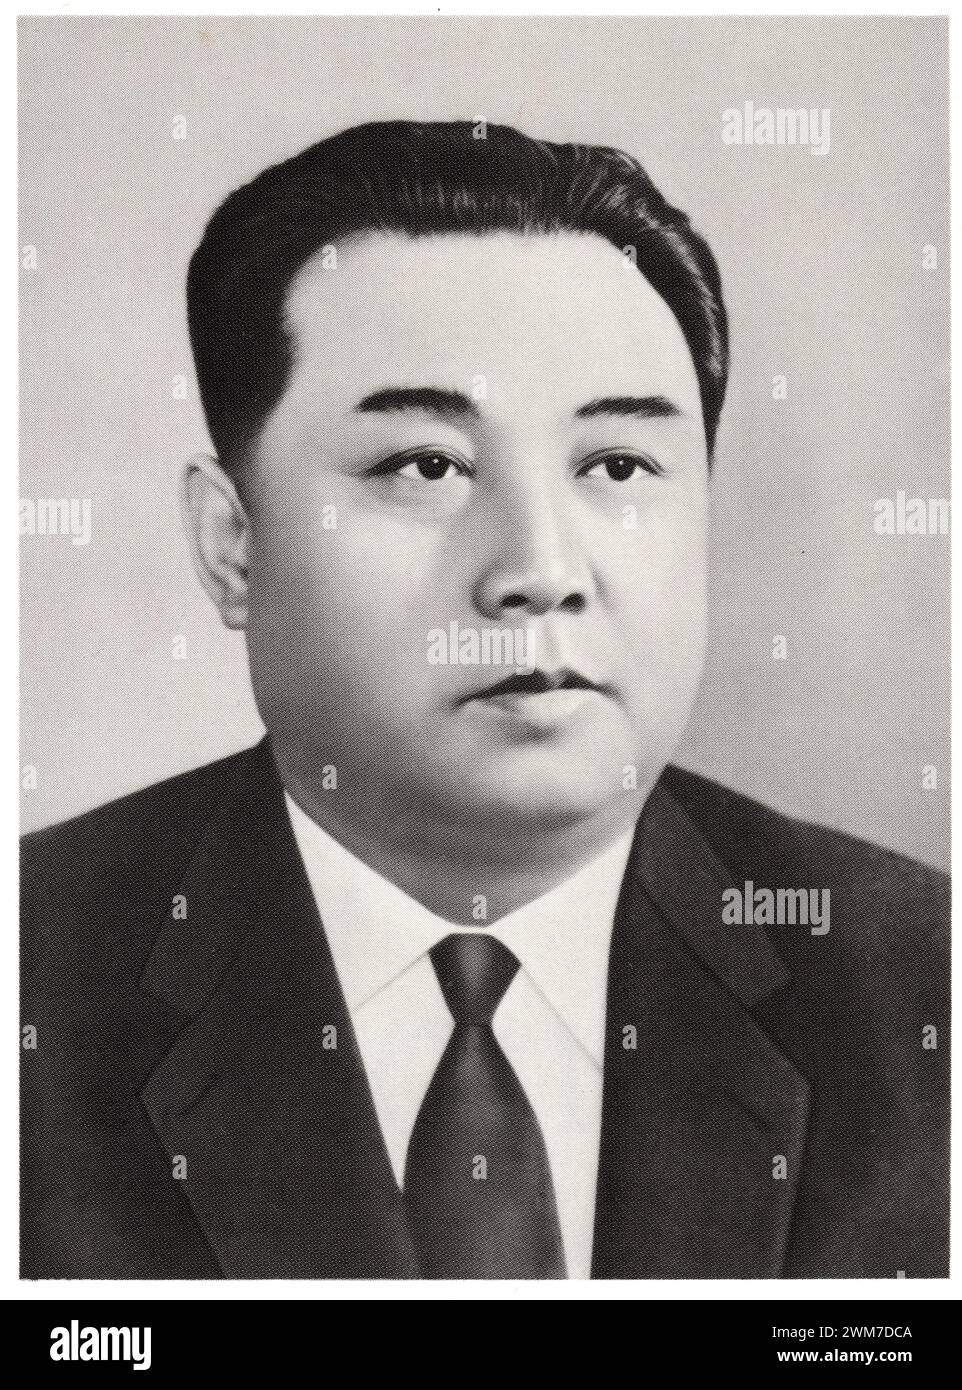 Portrait of Kim Il Sung (Kim Ir Sen) from propaganda print by Korean Workers’ Party Publishing House, 1975. Kim was a North Korean politician and the founder of North Korea, which he led as Supreme Leader from the country's establishment in 1948 until his death in 1994. Afterwards, he was declared eternal president. Stock Photo